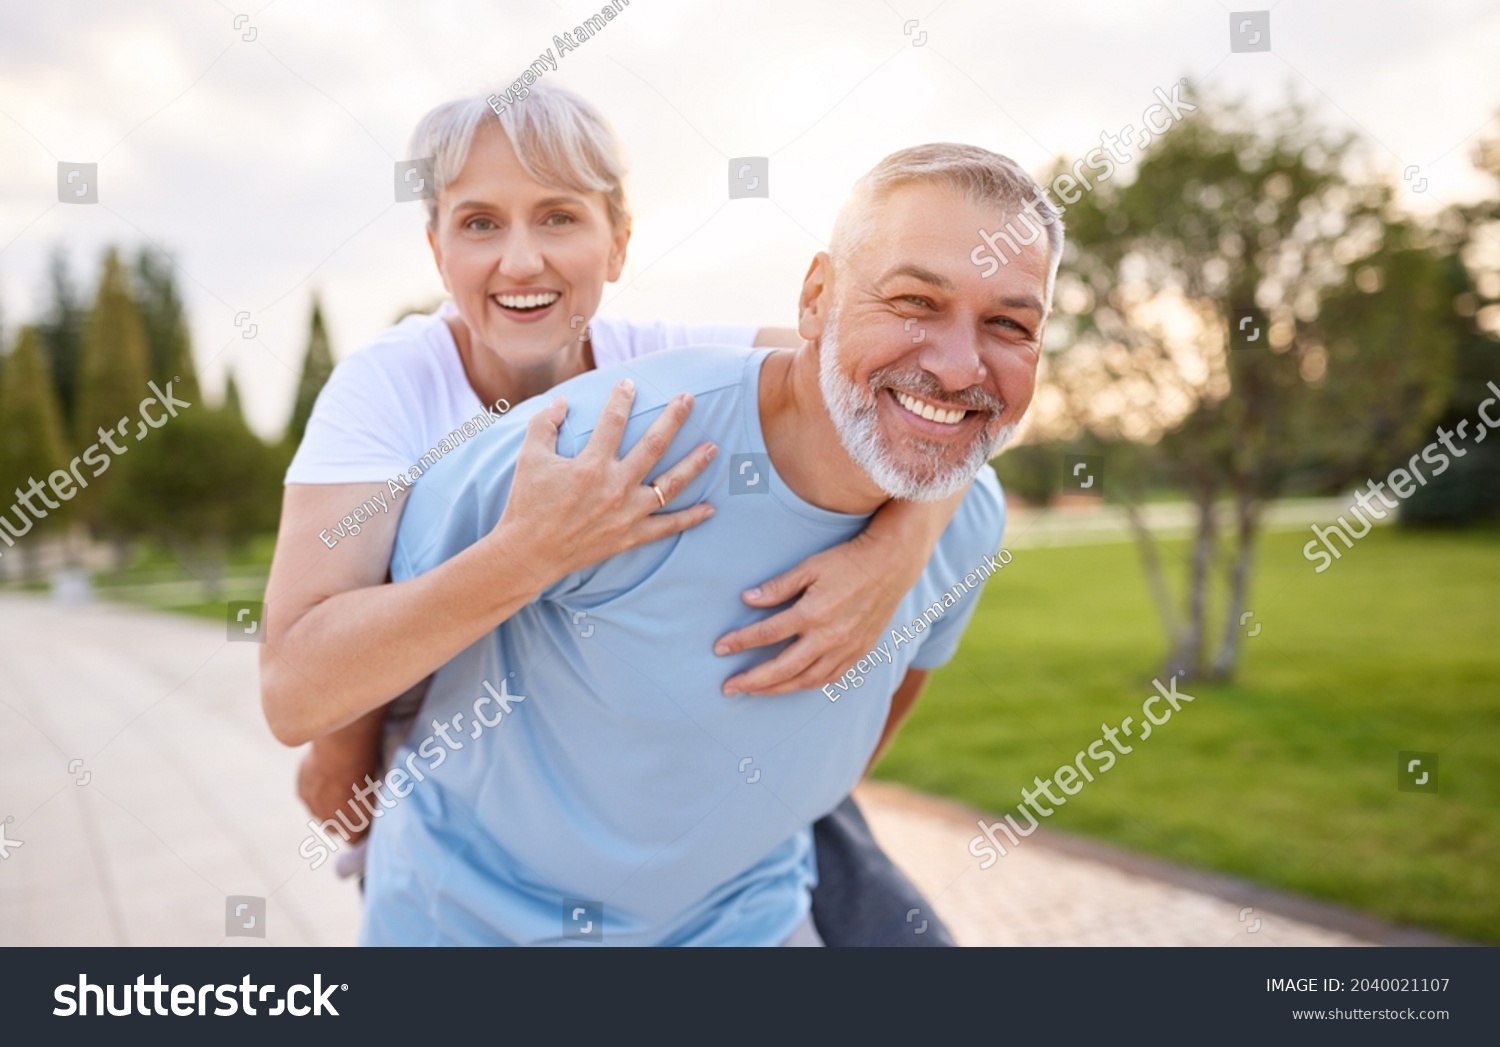 Portrait of lovely happy elderly couple on morning run outside in city park, retirees wife and husband rejoice in active lifestyle, smiling woman tenderly embracing her spouse after routine jogging #2040021107